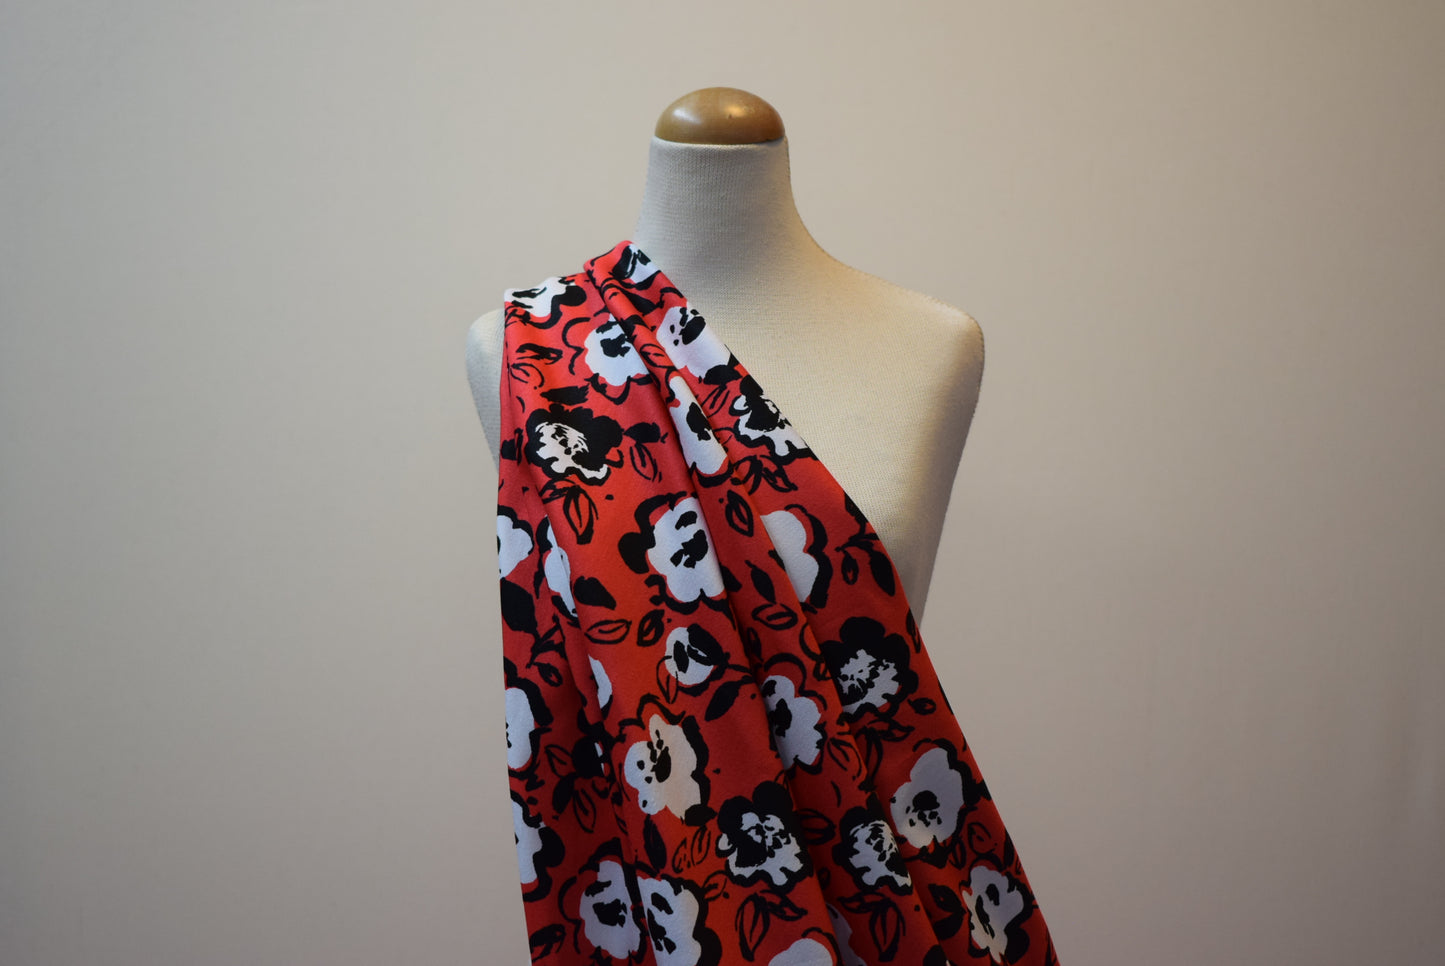 Black & White Floral On Red Sateen